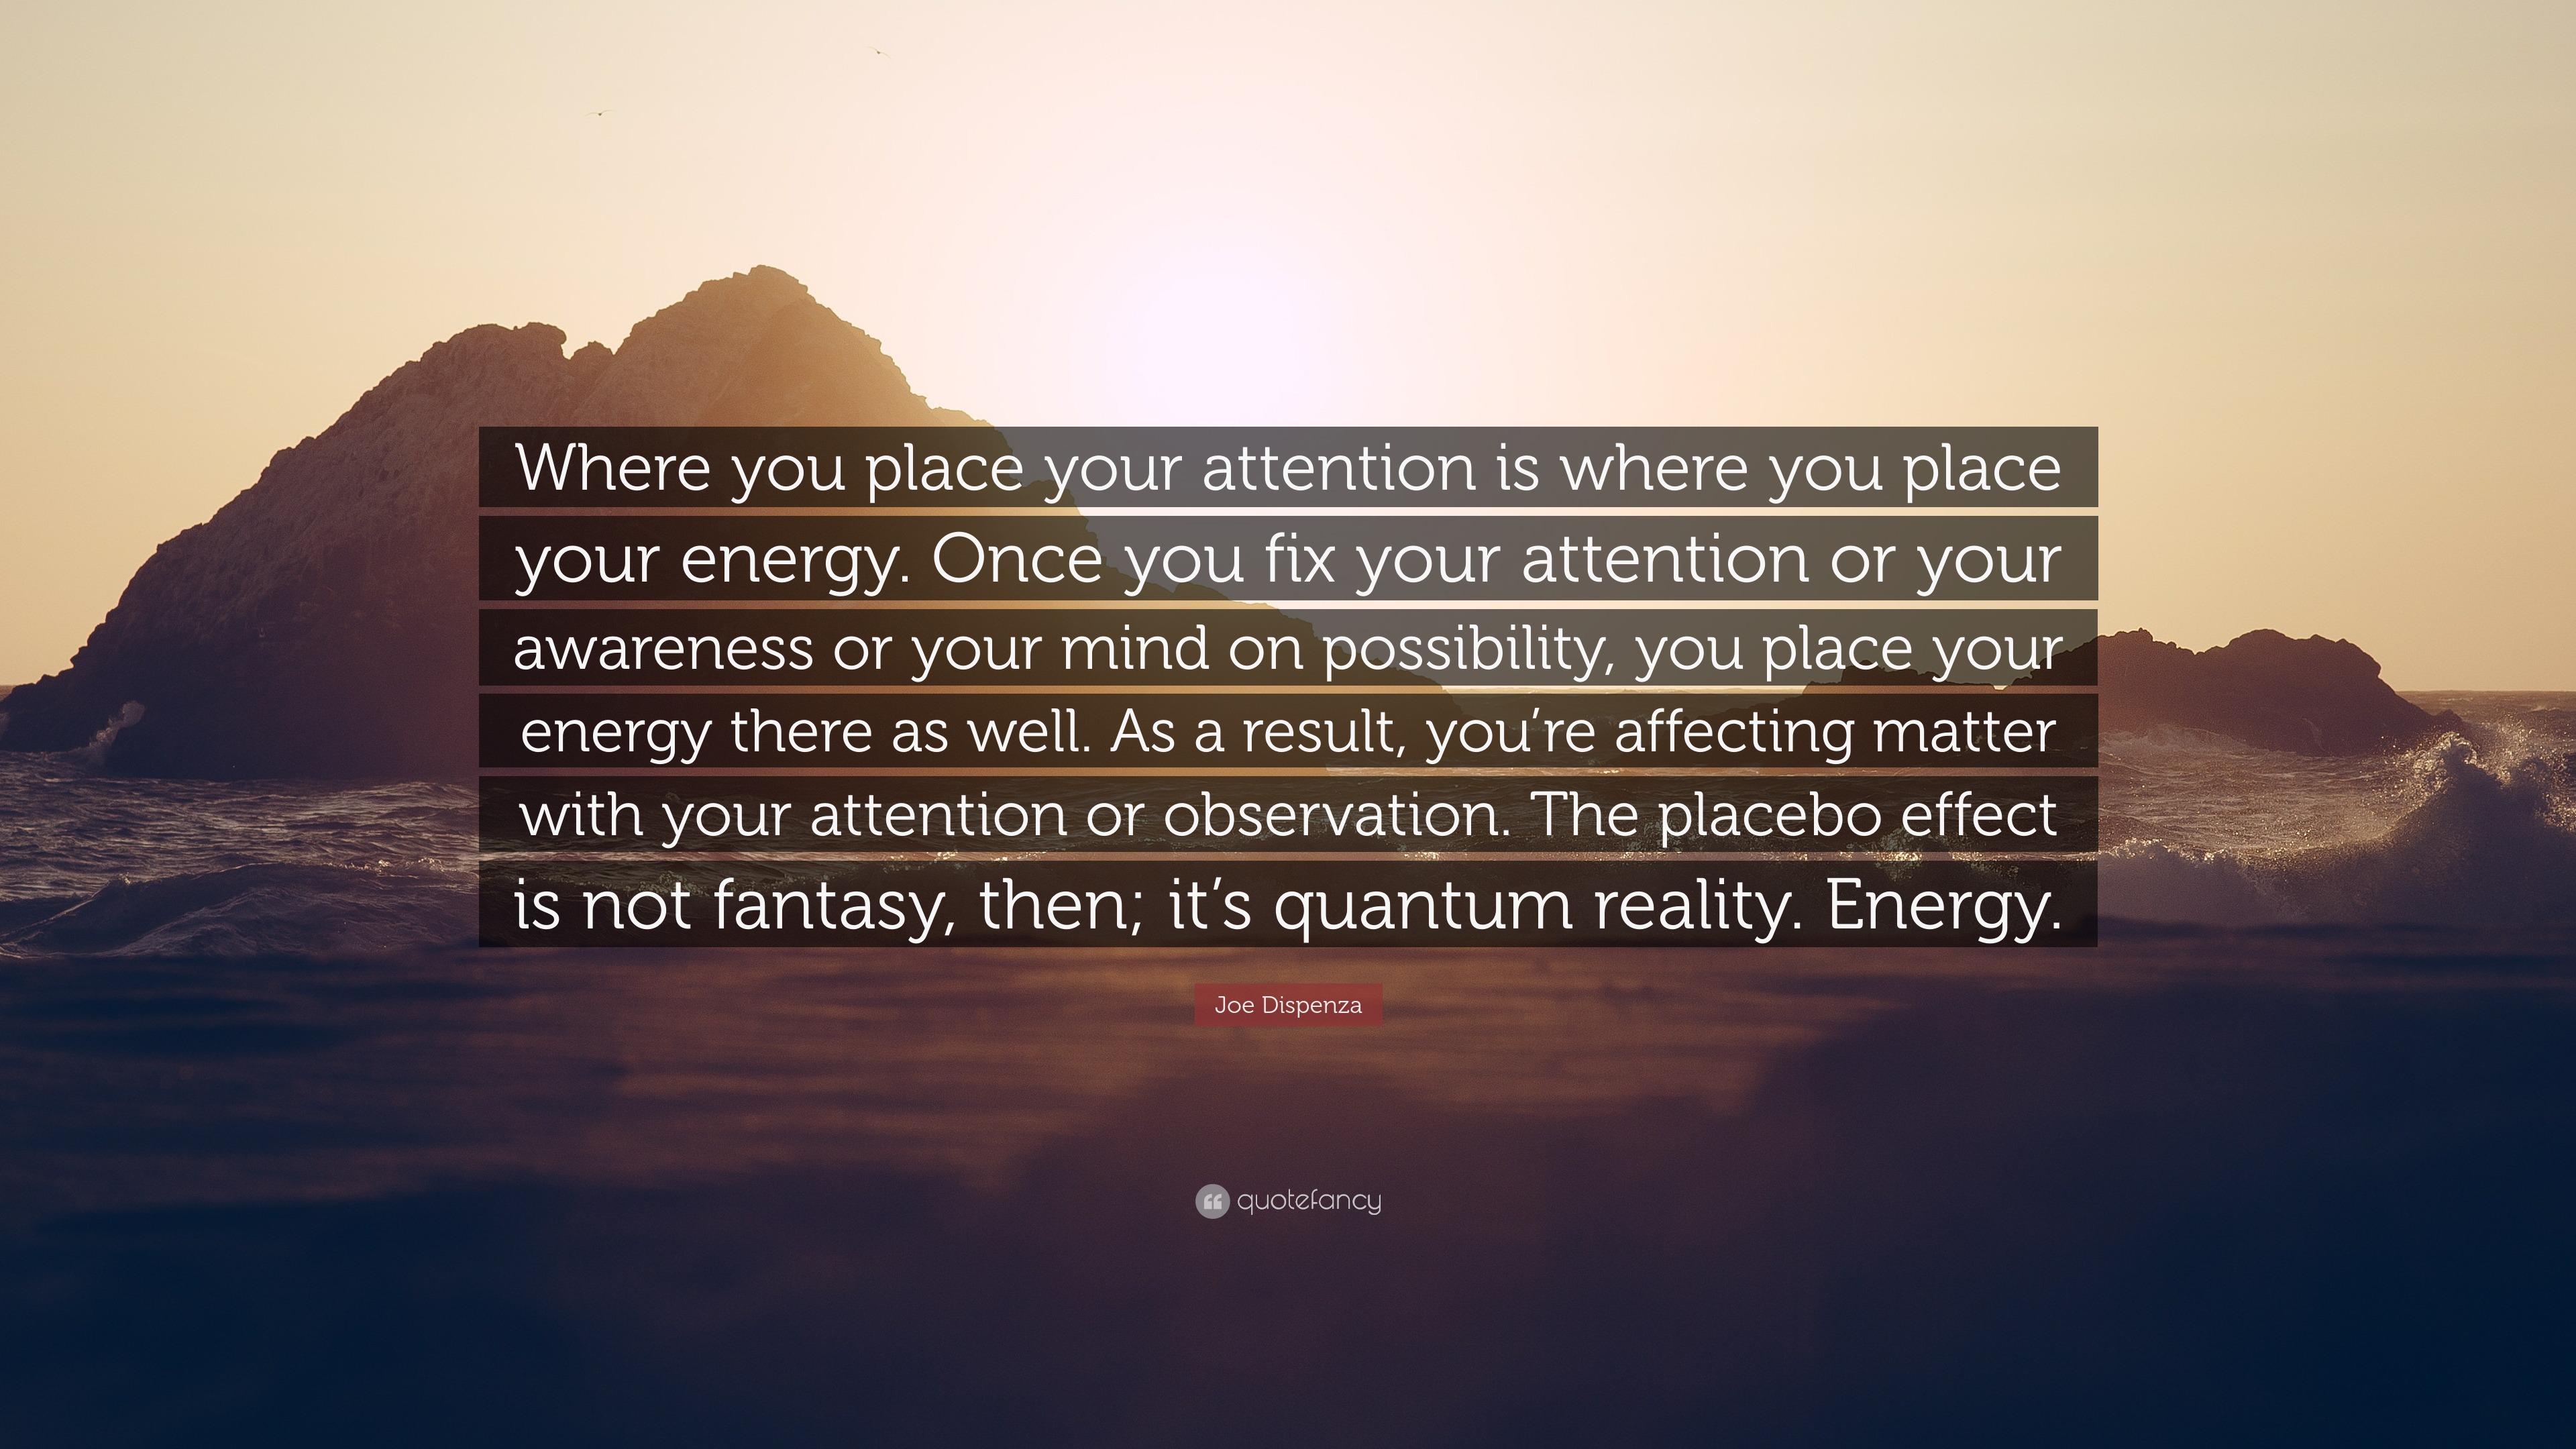 Joe Dispenza Quote: “Where you place your attention is where you place your  energy. Once you fix your attention or your awareness or your min”